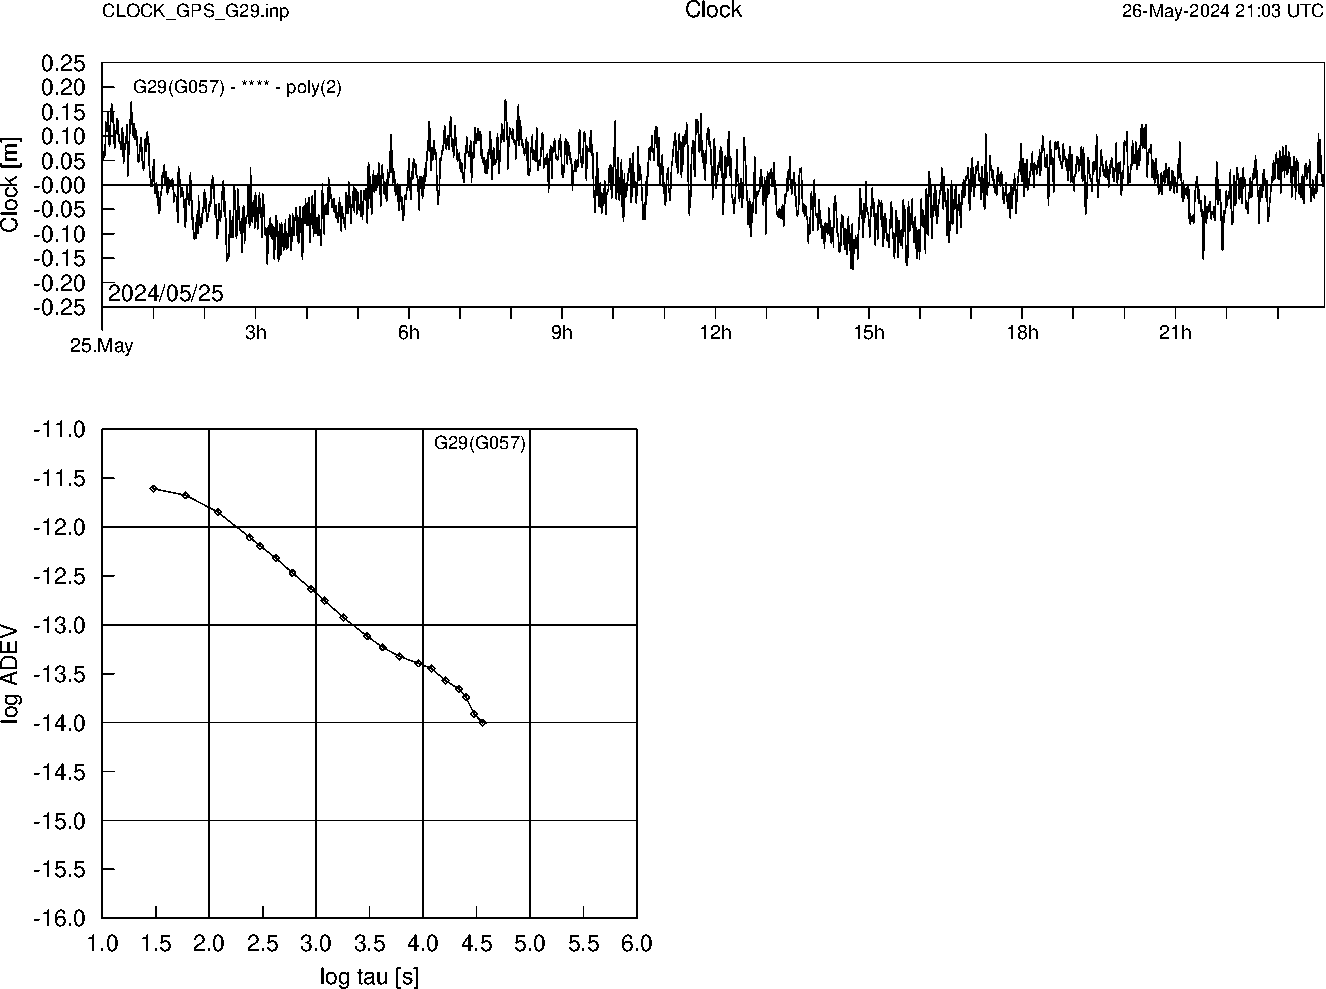 GPS G29 Clock Time Series and Allan Deviation